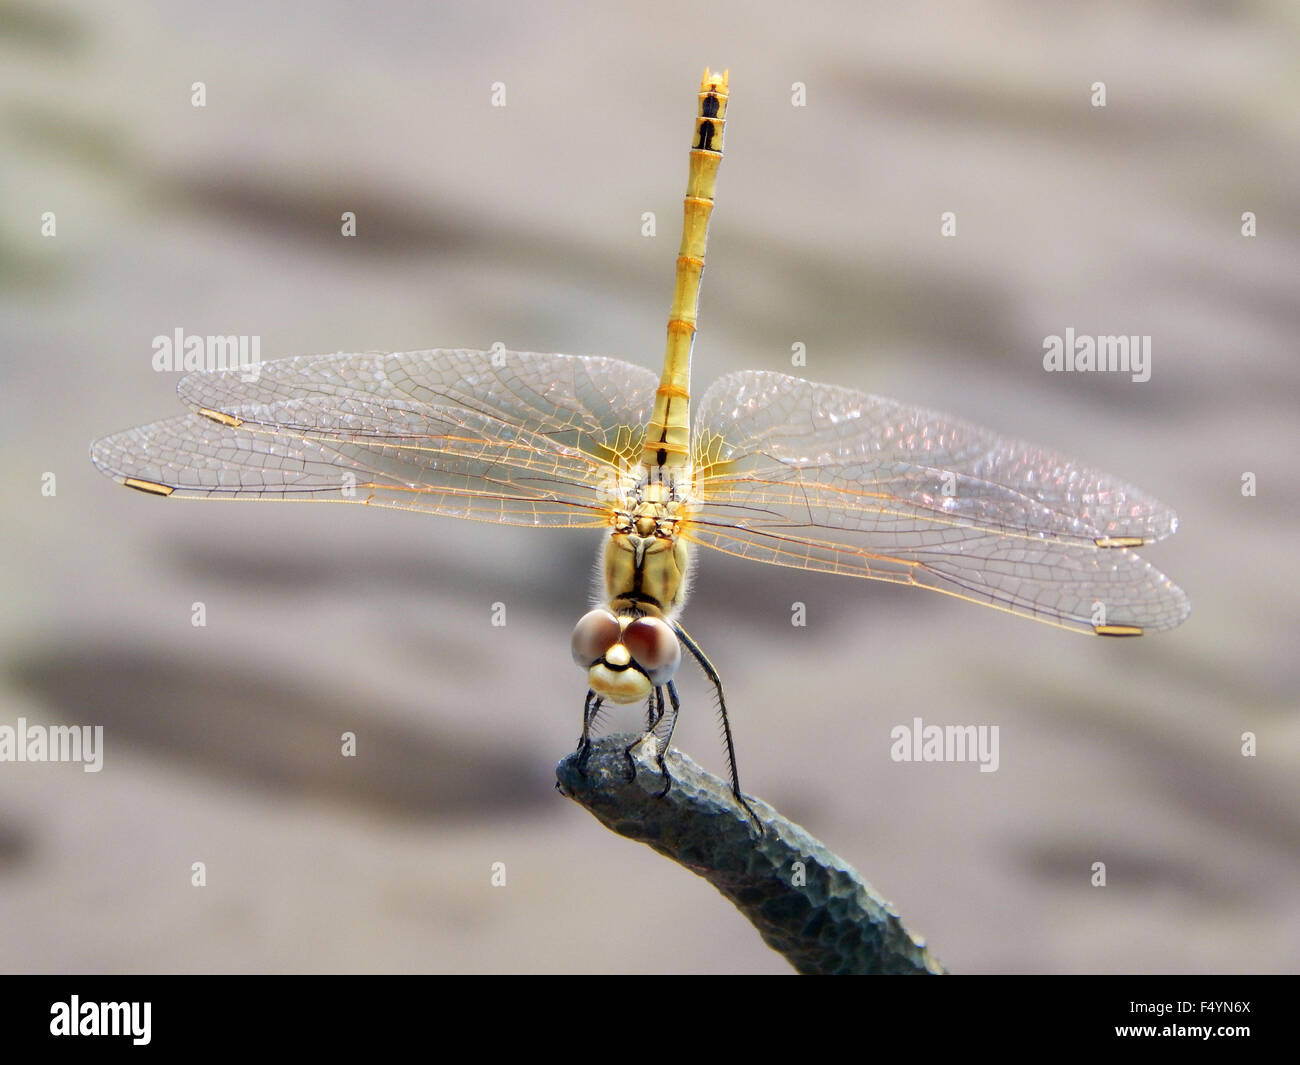 dragonfly, insect, fly, animal, wildlife, wing, nature, macro, background, dragonflies, beautiful, closeup, water Stock Photo